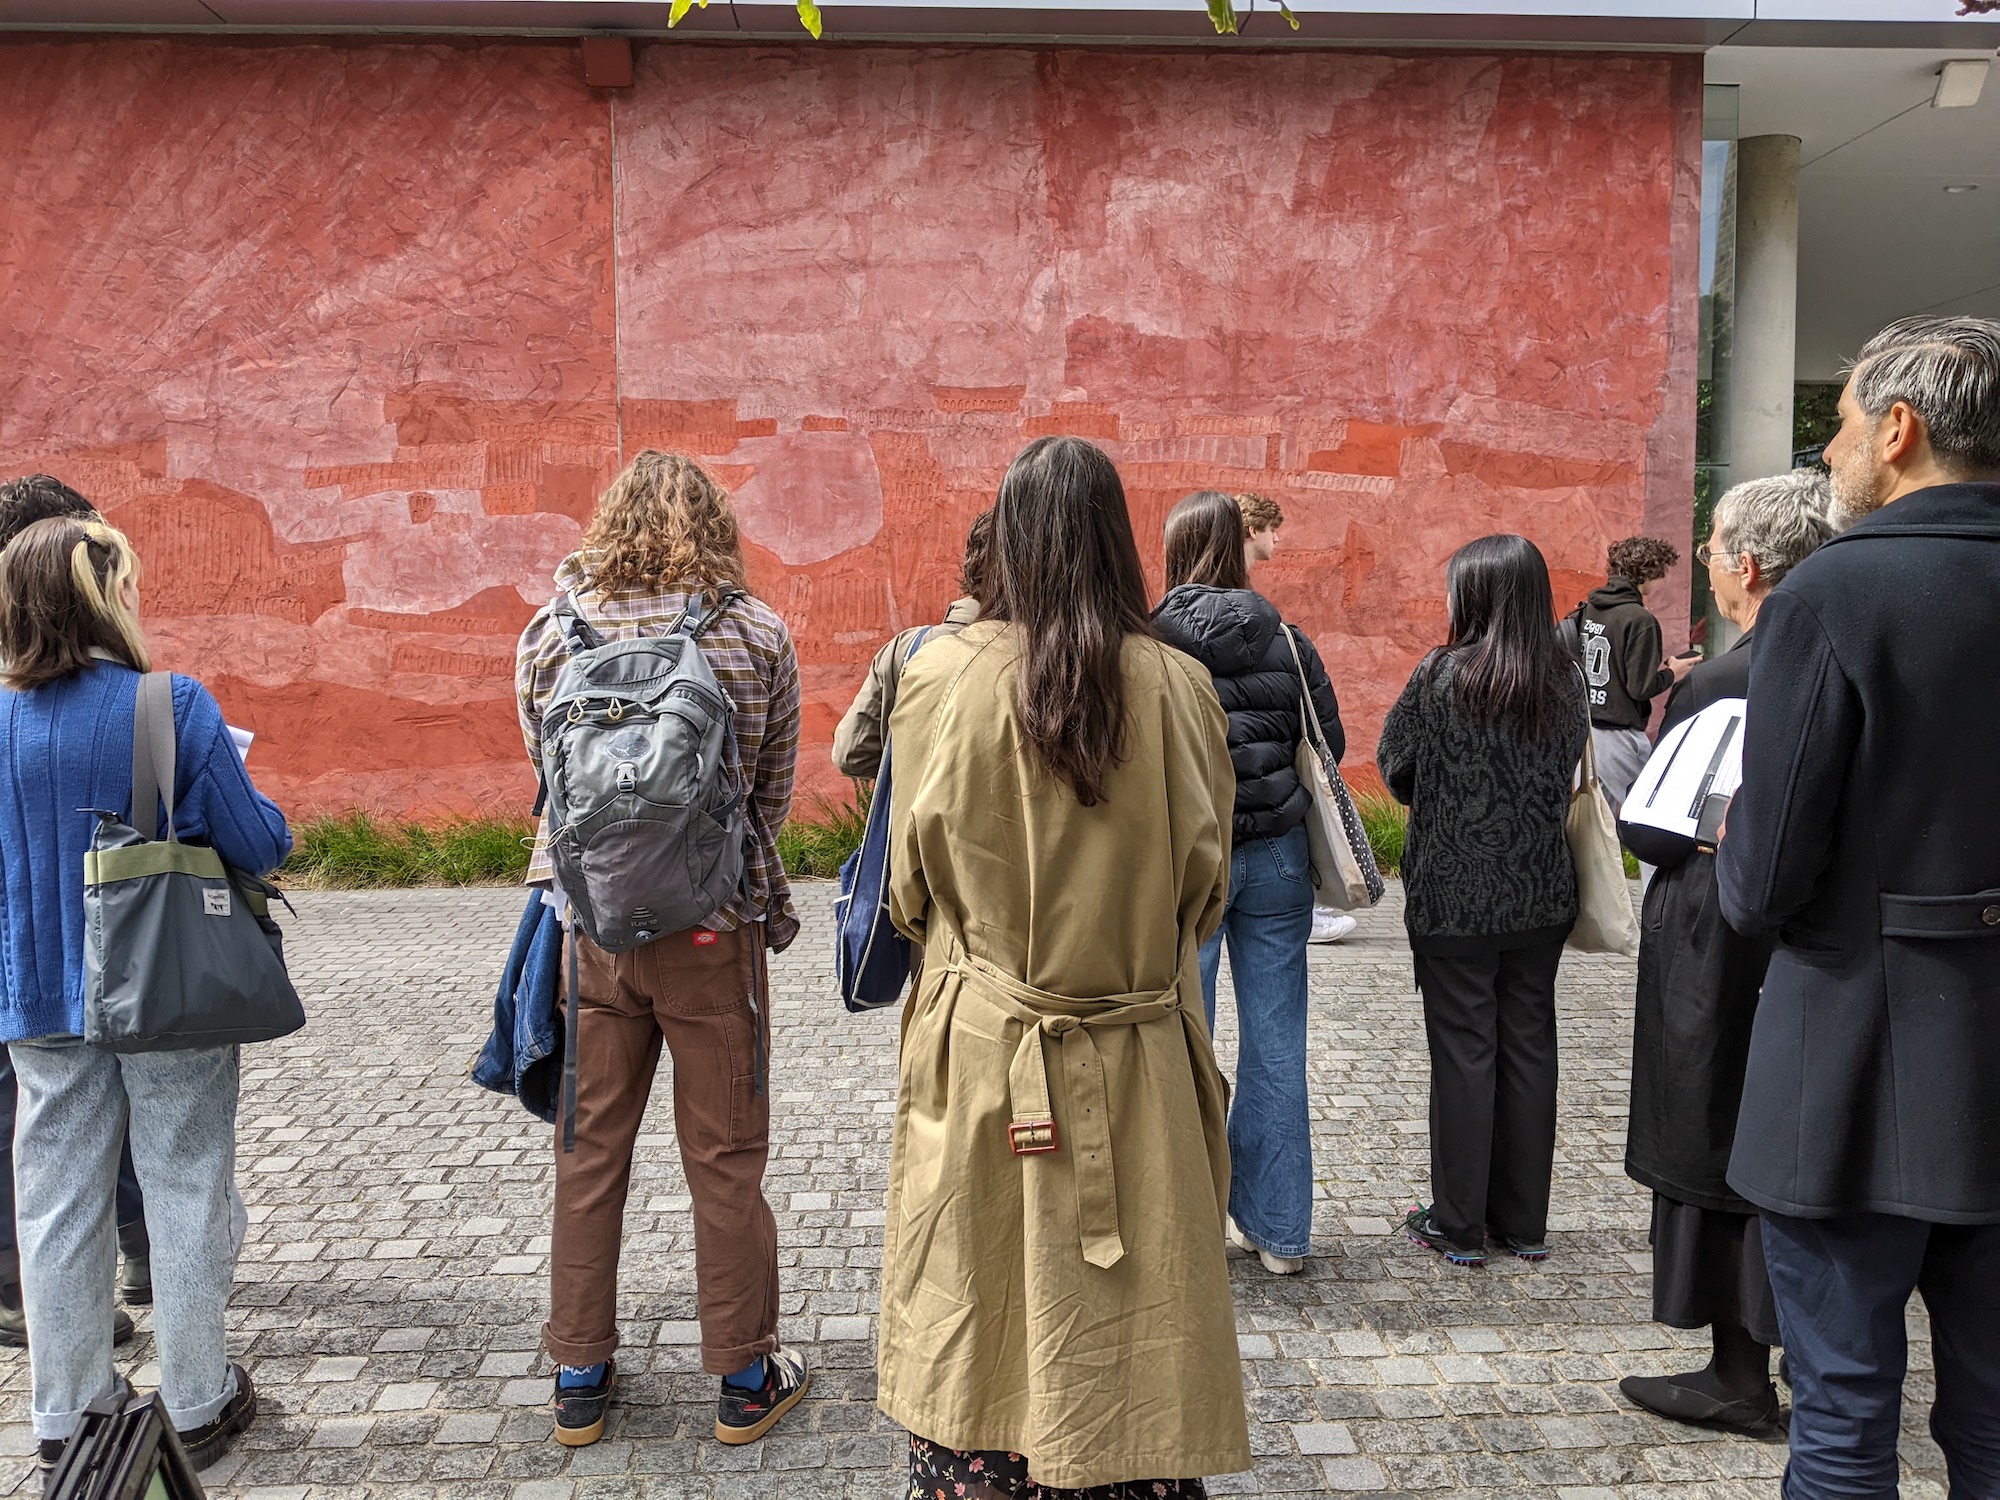 A group of people stand with their backs to the camera, facing a mural